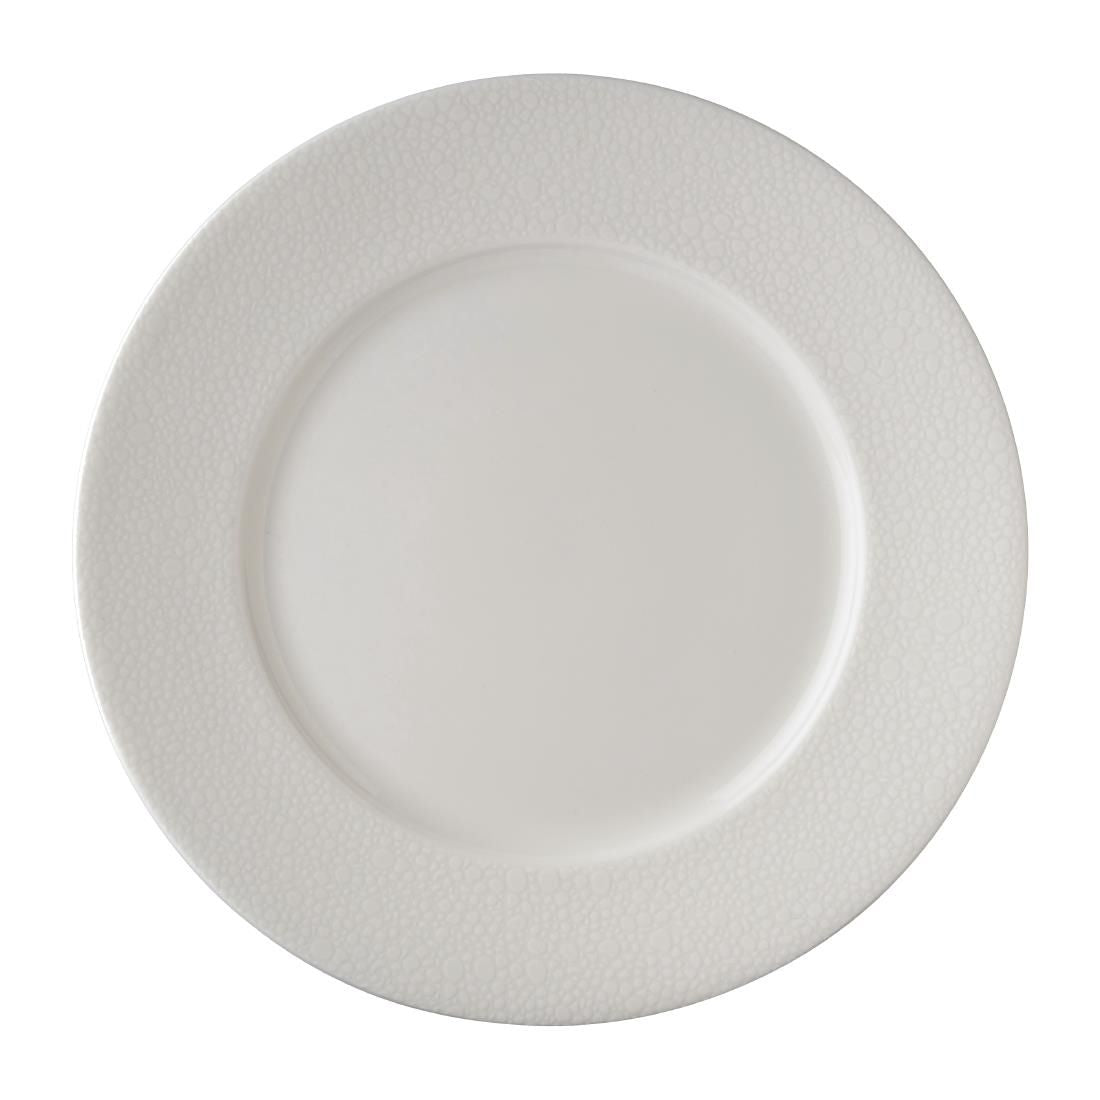 FE048 Royal Crown Derby Effervesce White Flat Rim Plate 215mm (Pack of 6) JD Catering Equipment Solutions Ltd